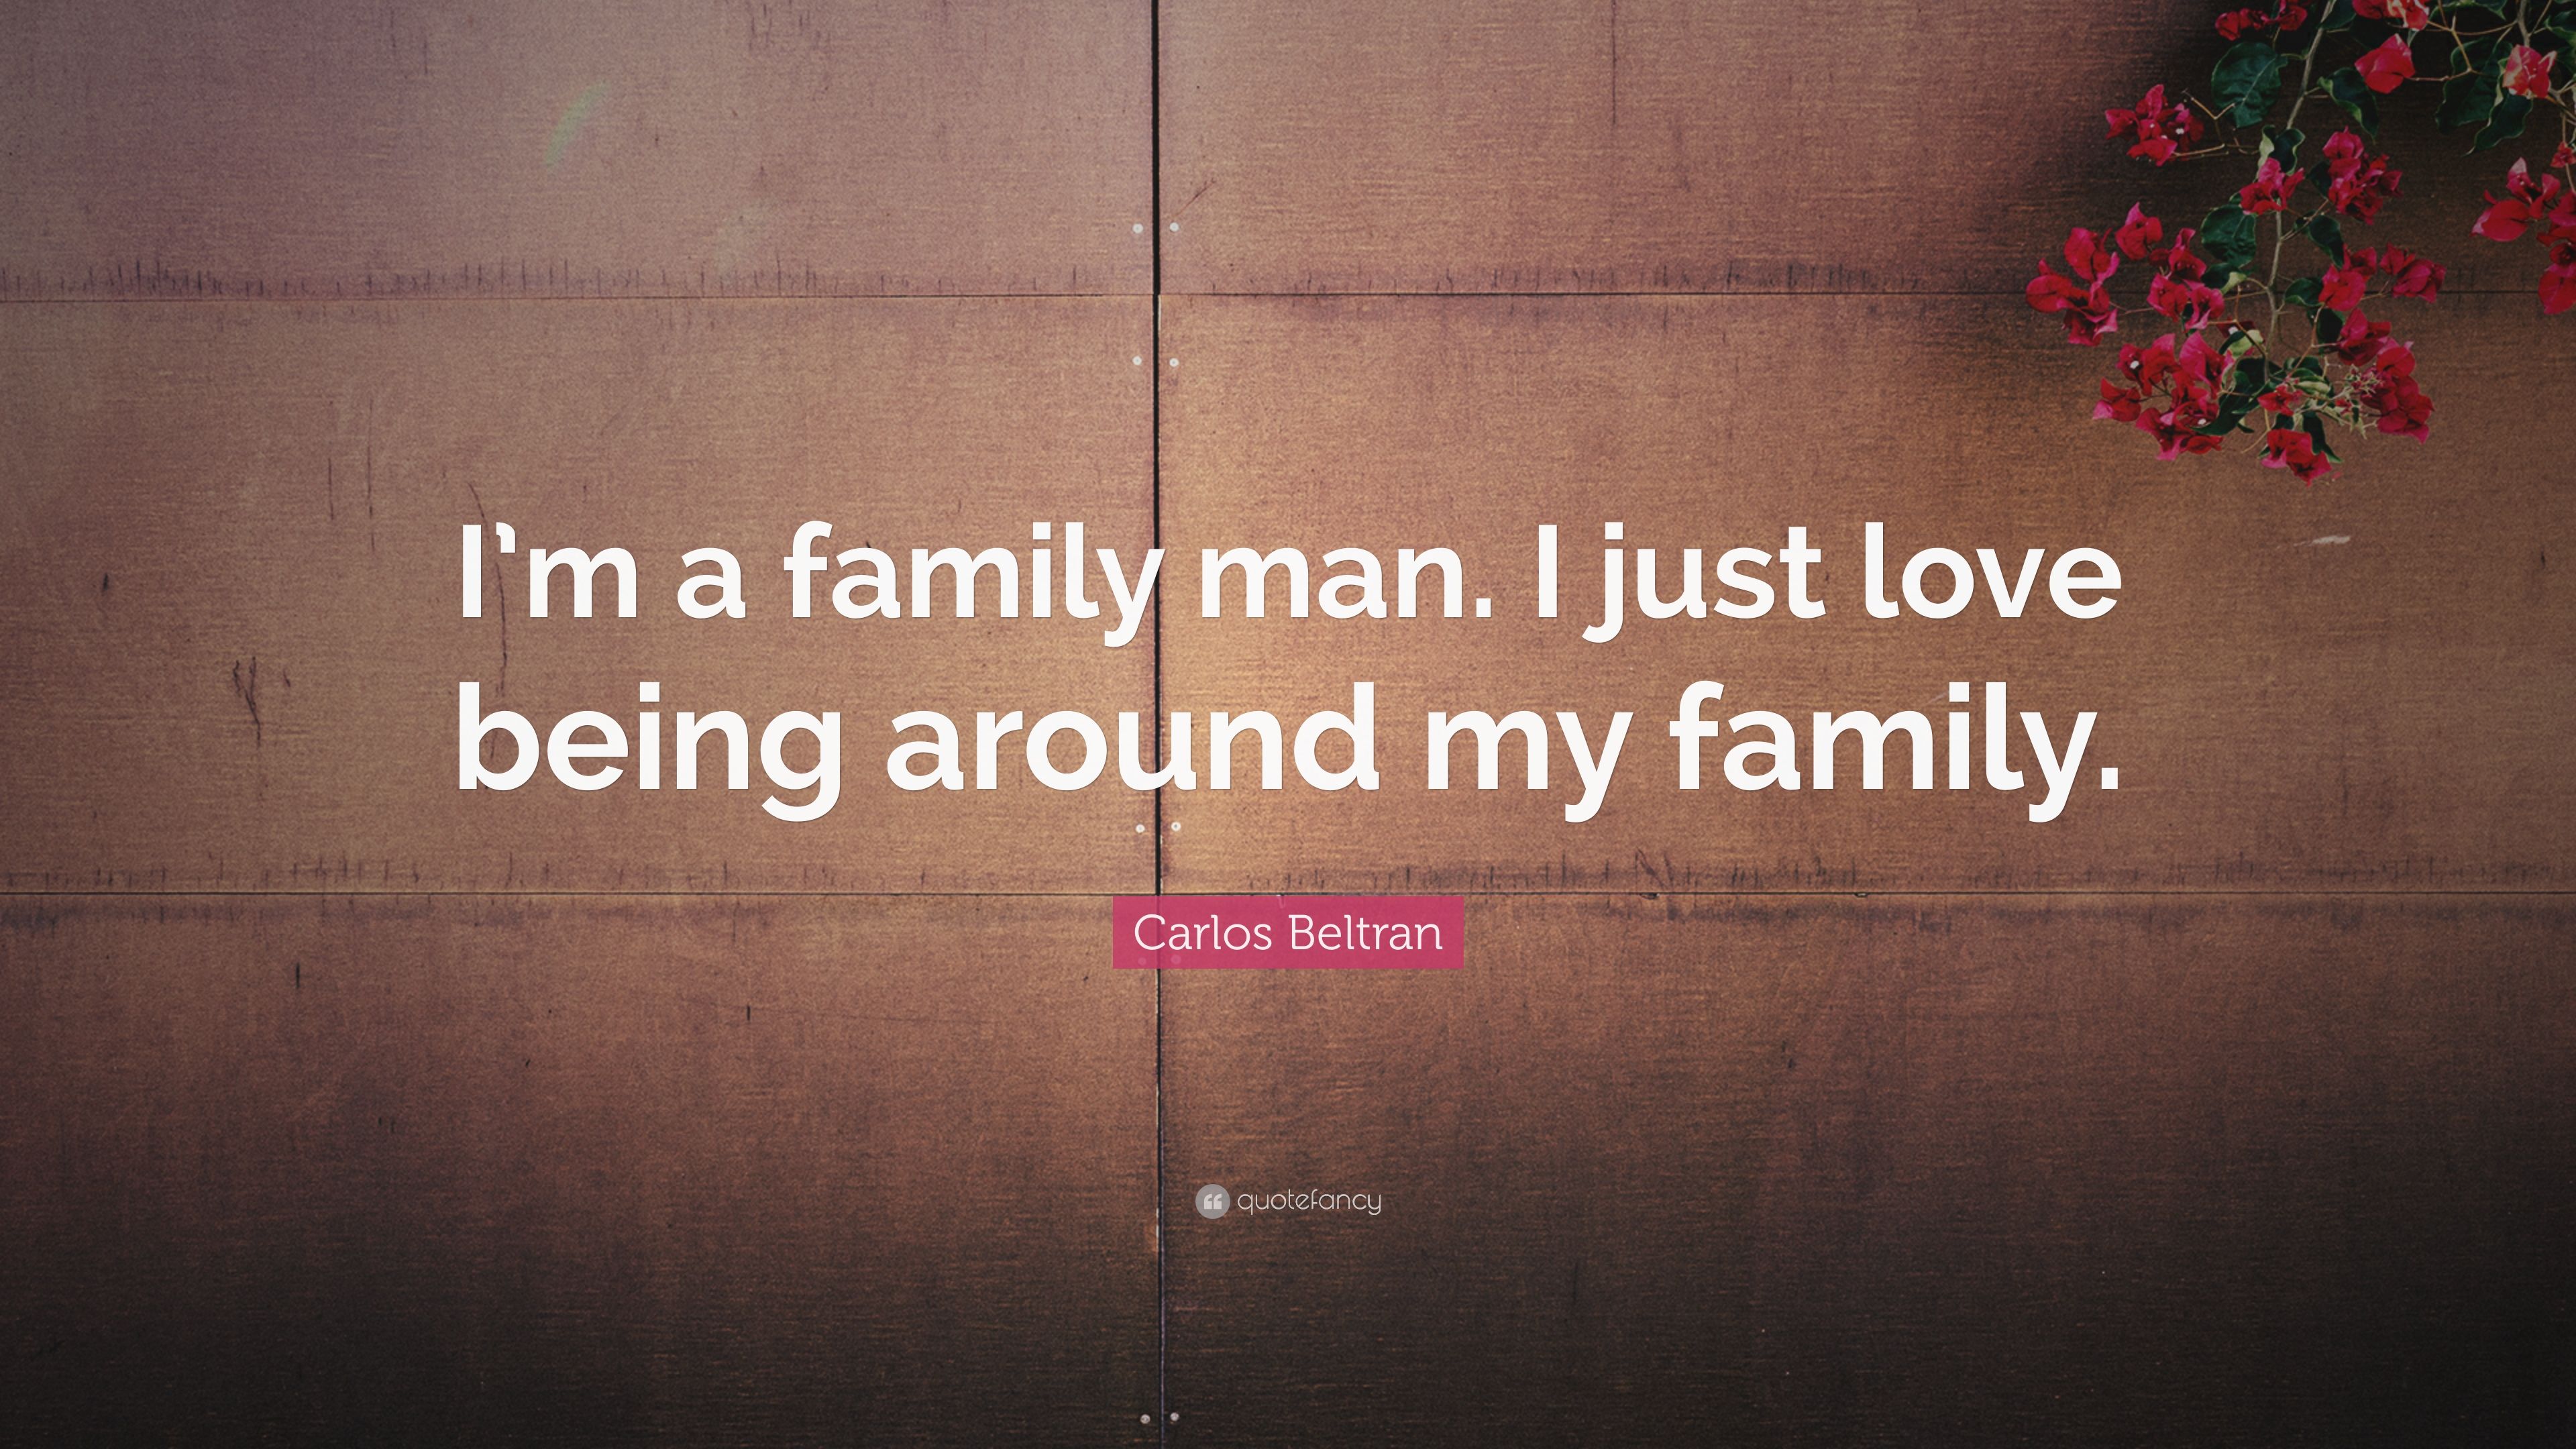 Carlos Beltran Quote: “I'm a family man. I just love being around